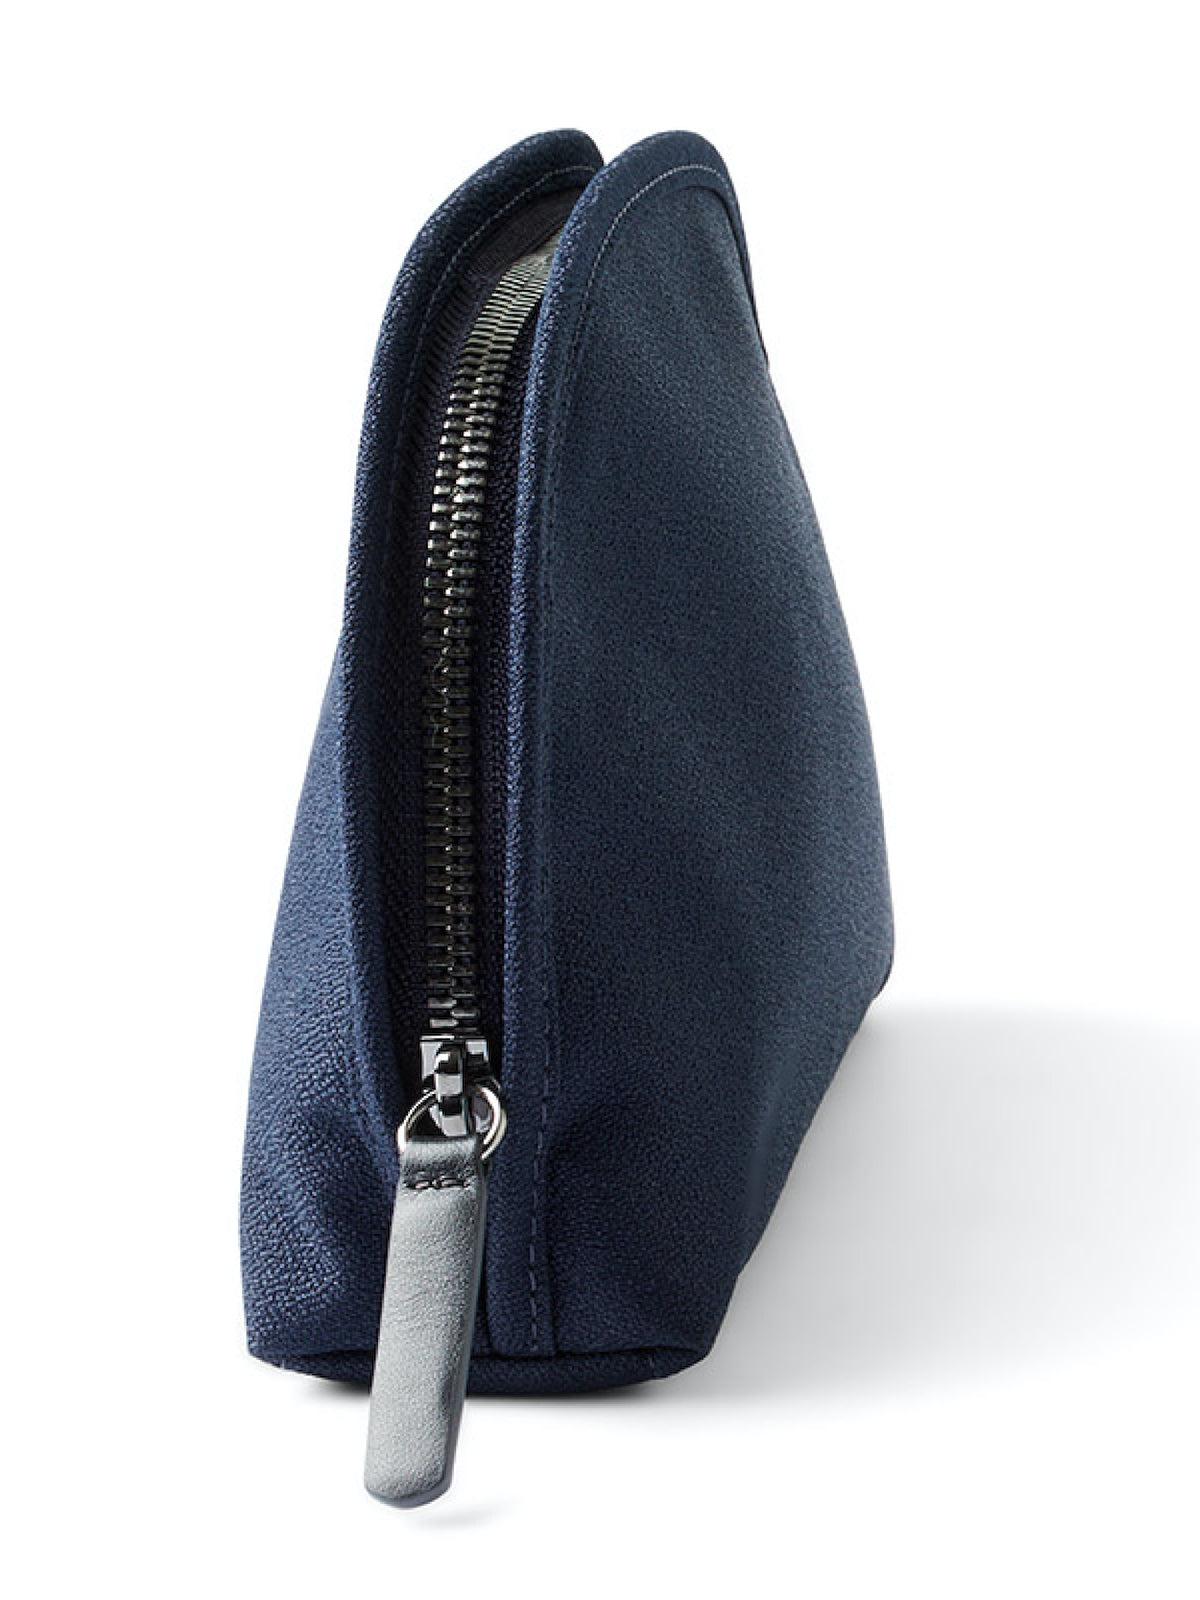 Bellroy Classic Pouch Navy